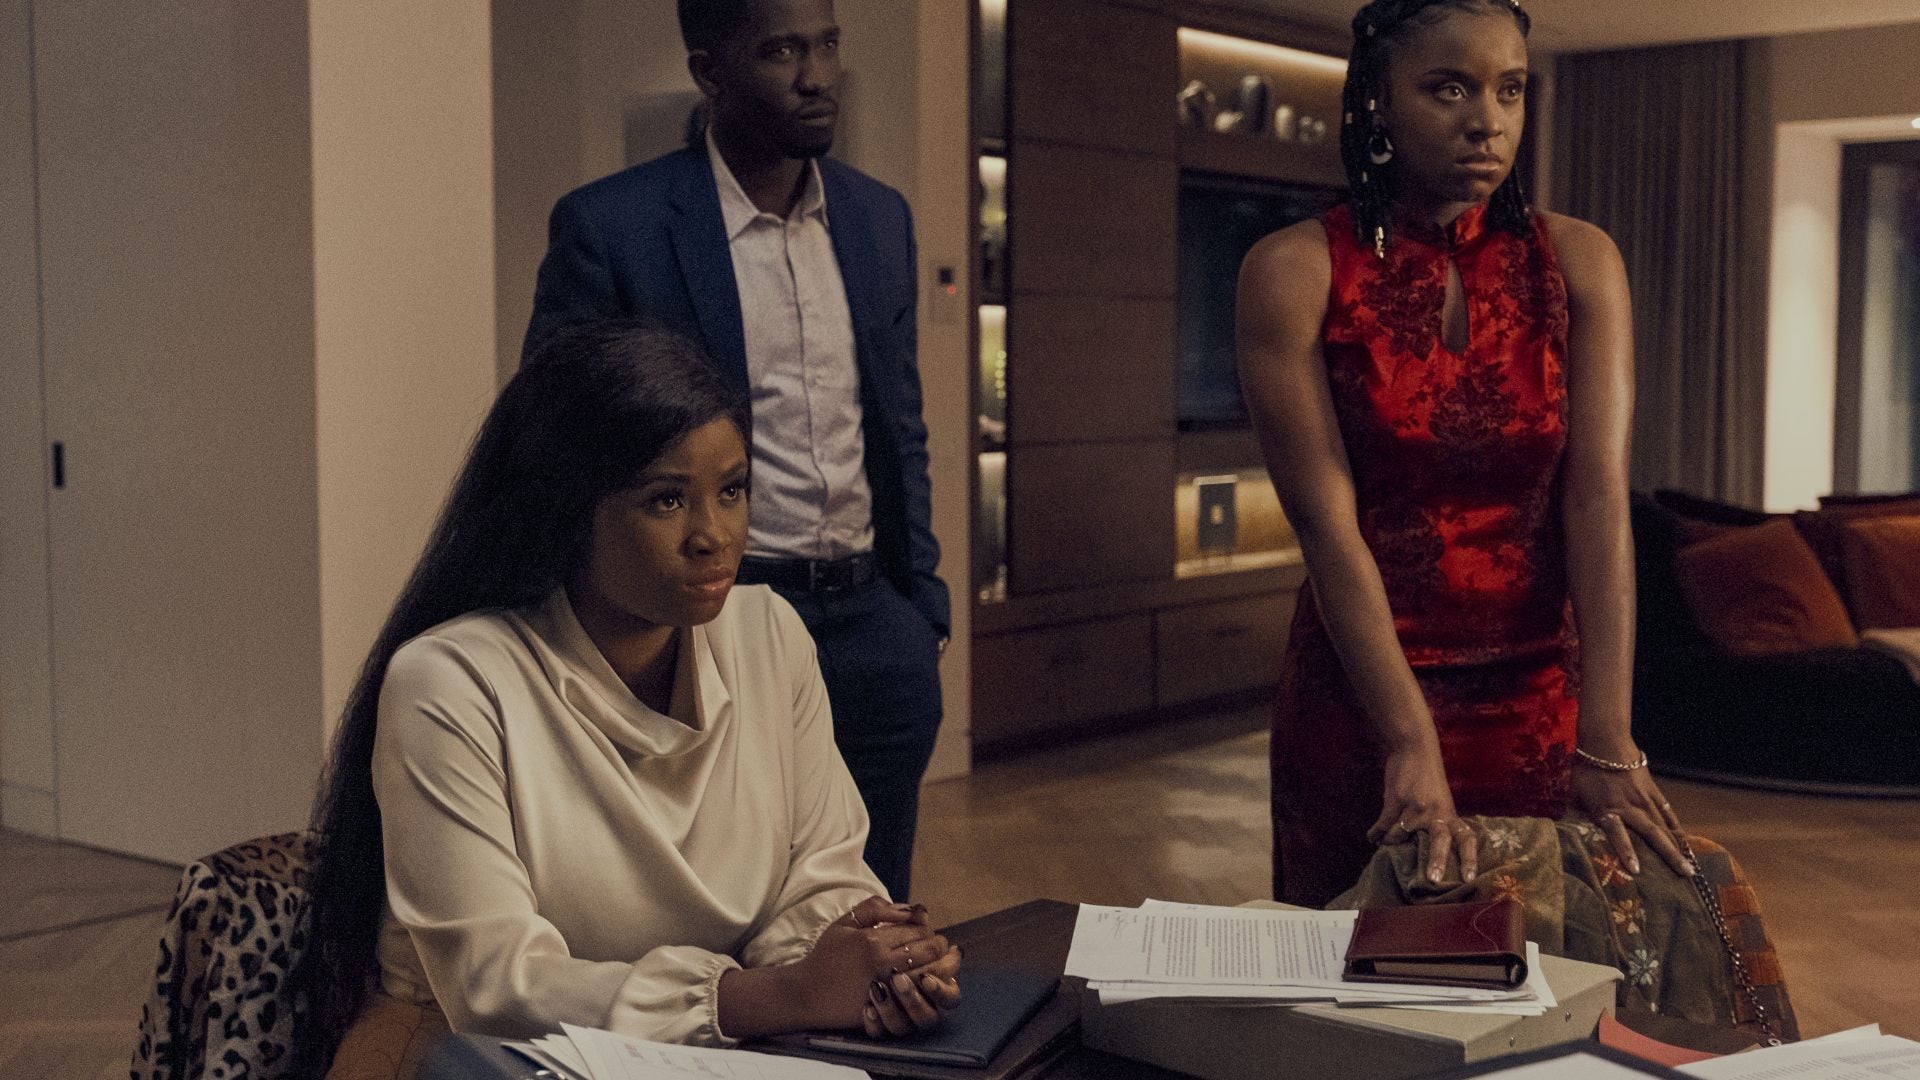 EXCLUSIVE: Prime Video Releases First Trailer For Nigerian Family Drama 'RICHES'